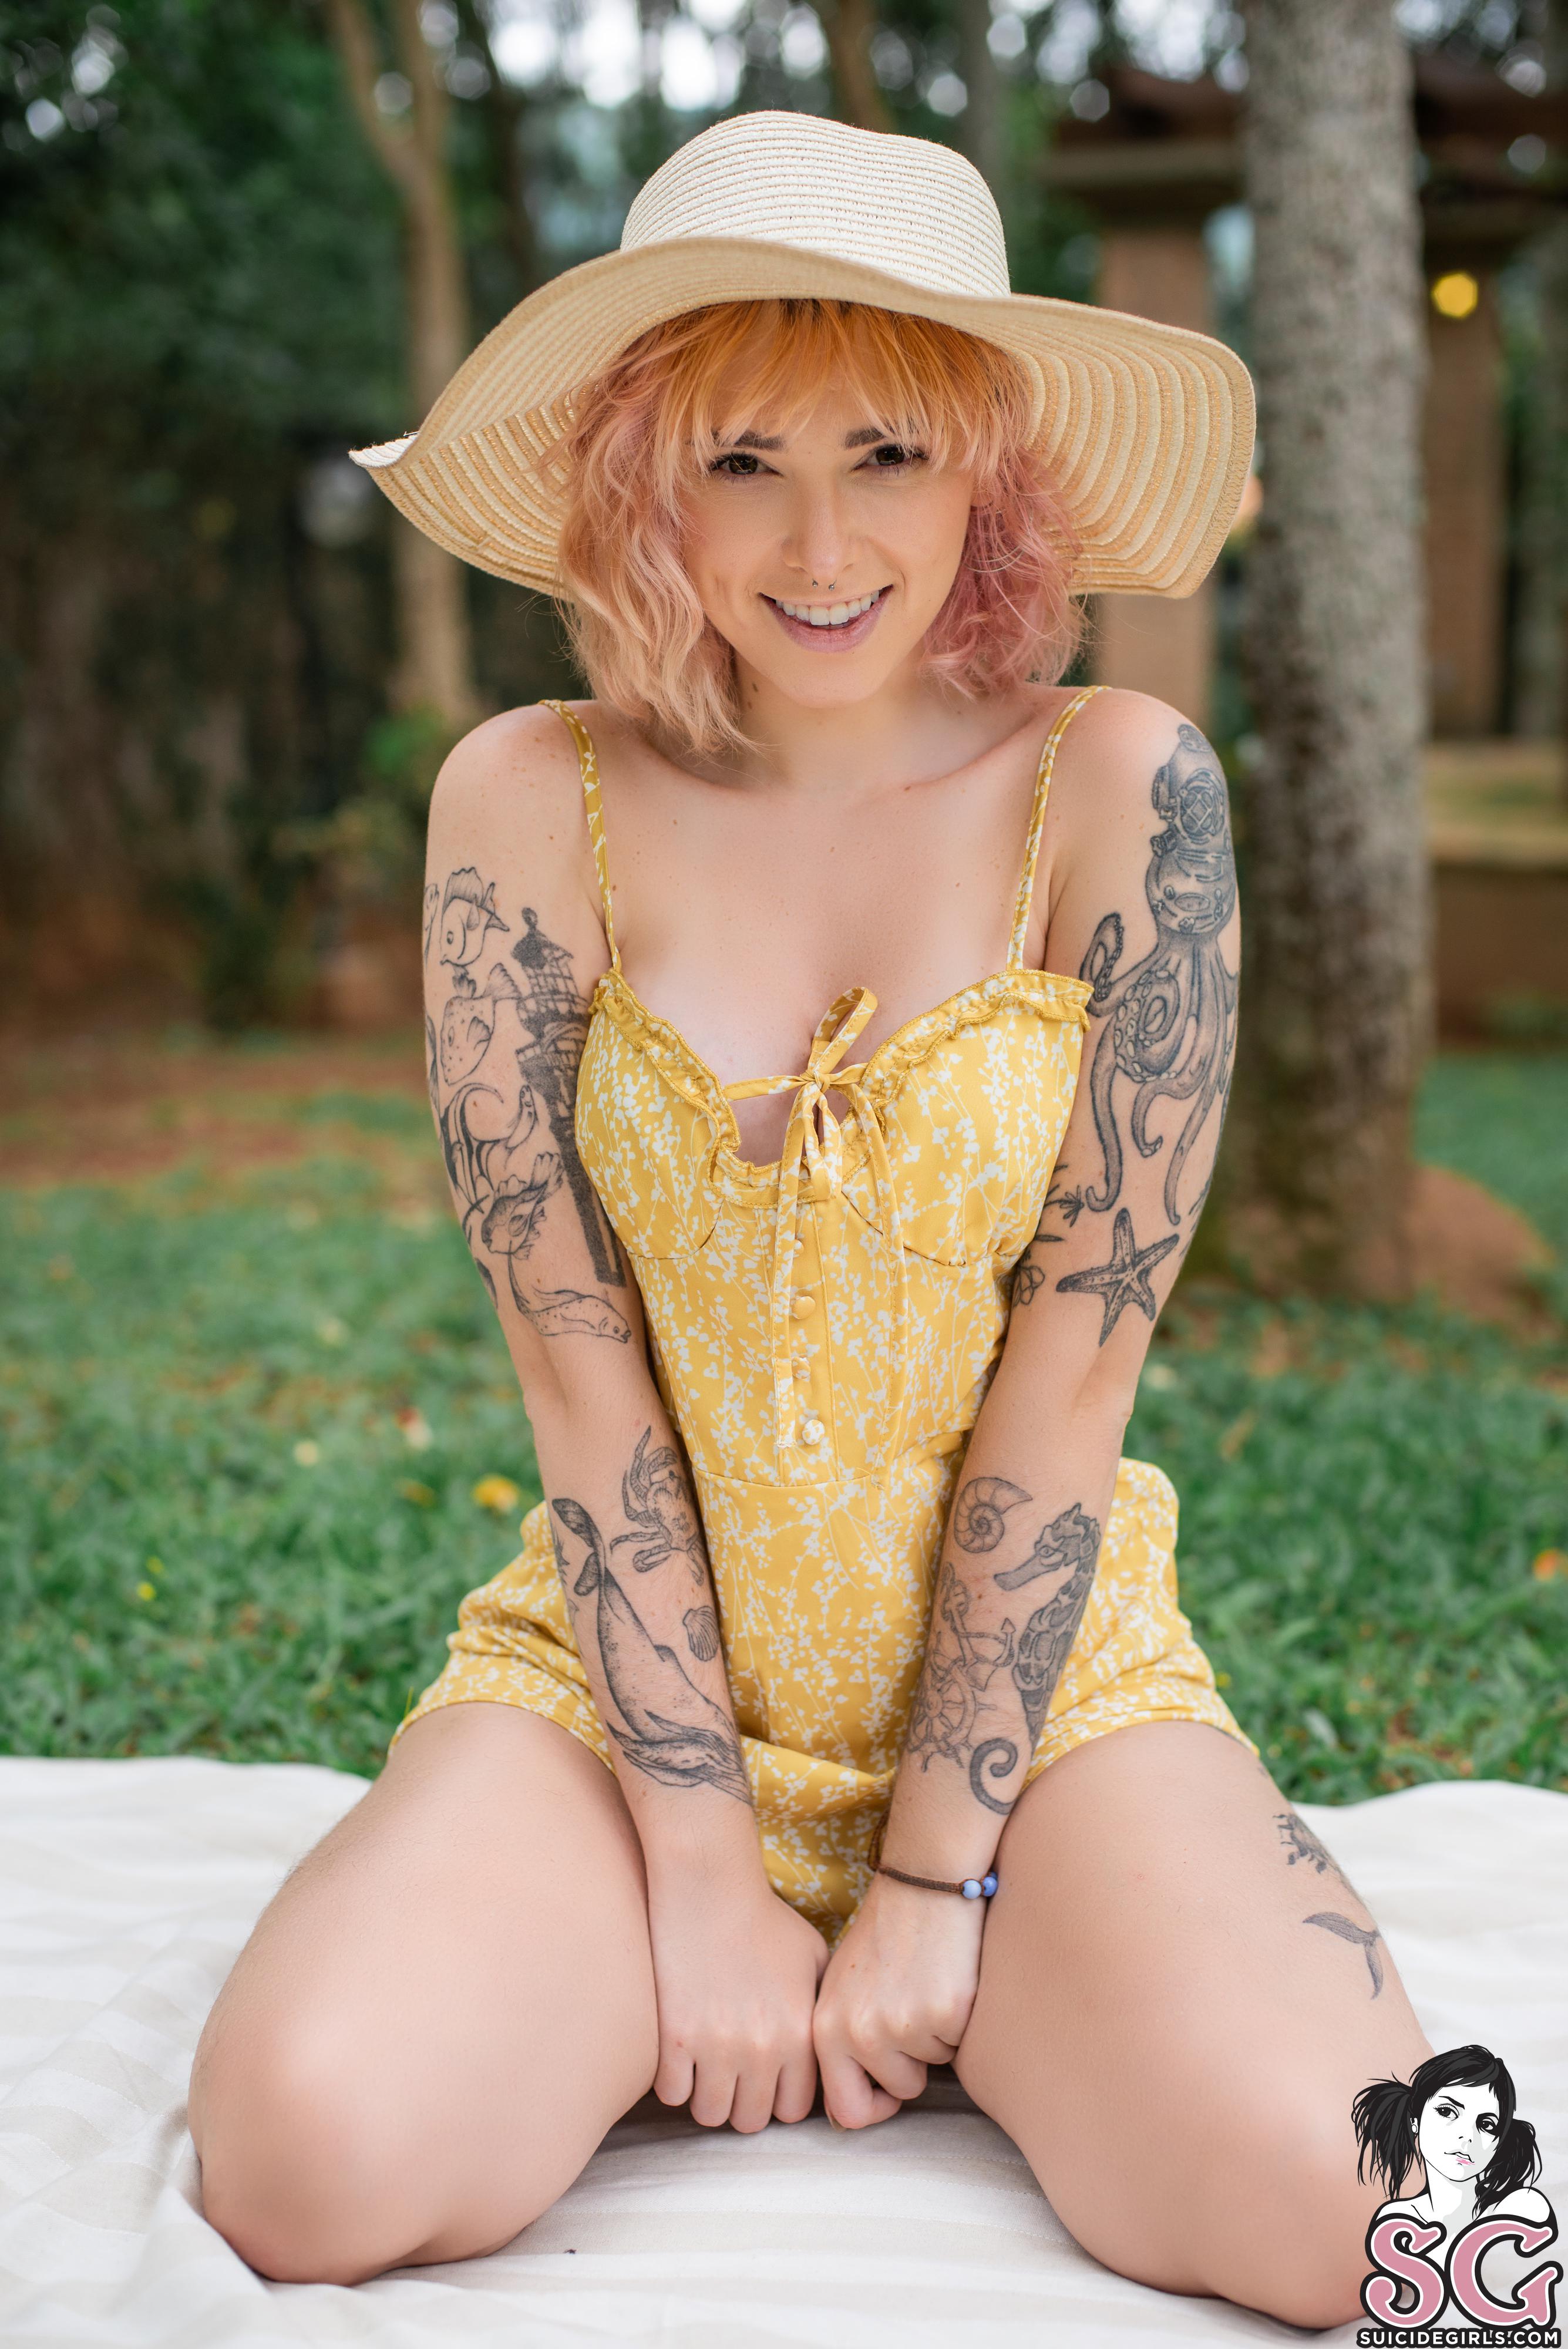 People 2670x4000 Wichitak Suicide women Suicide Girls model inked girls tattoo women outdoors dyed hair portrait display dress bare shoulders looking at viewer kneeling hat smiling